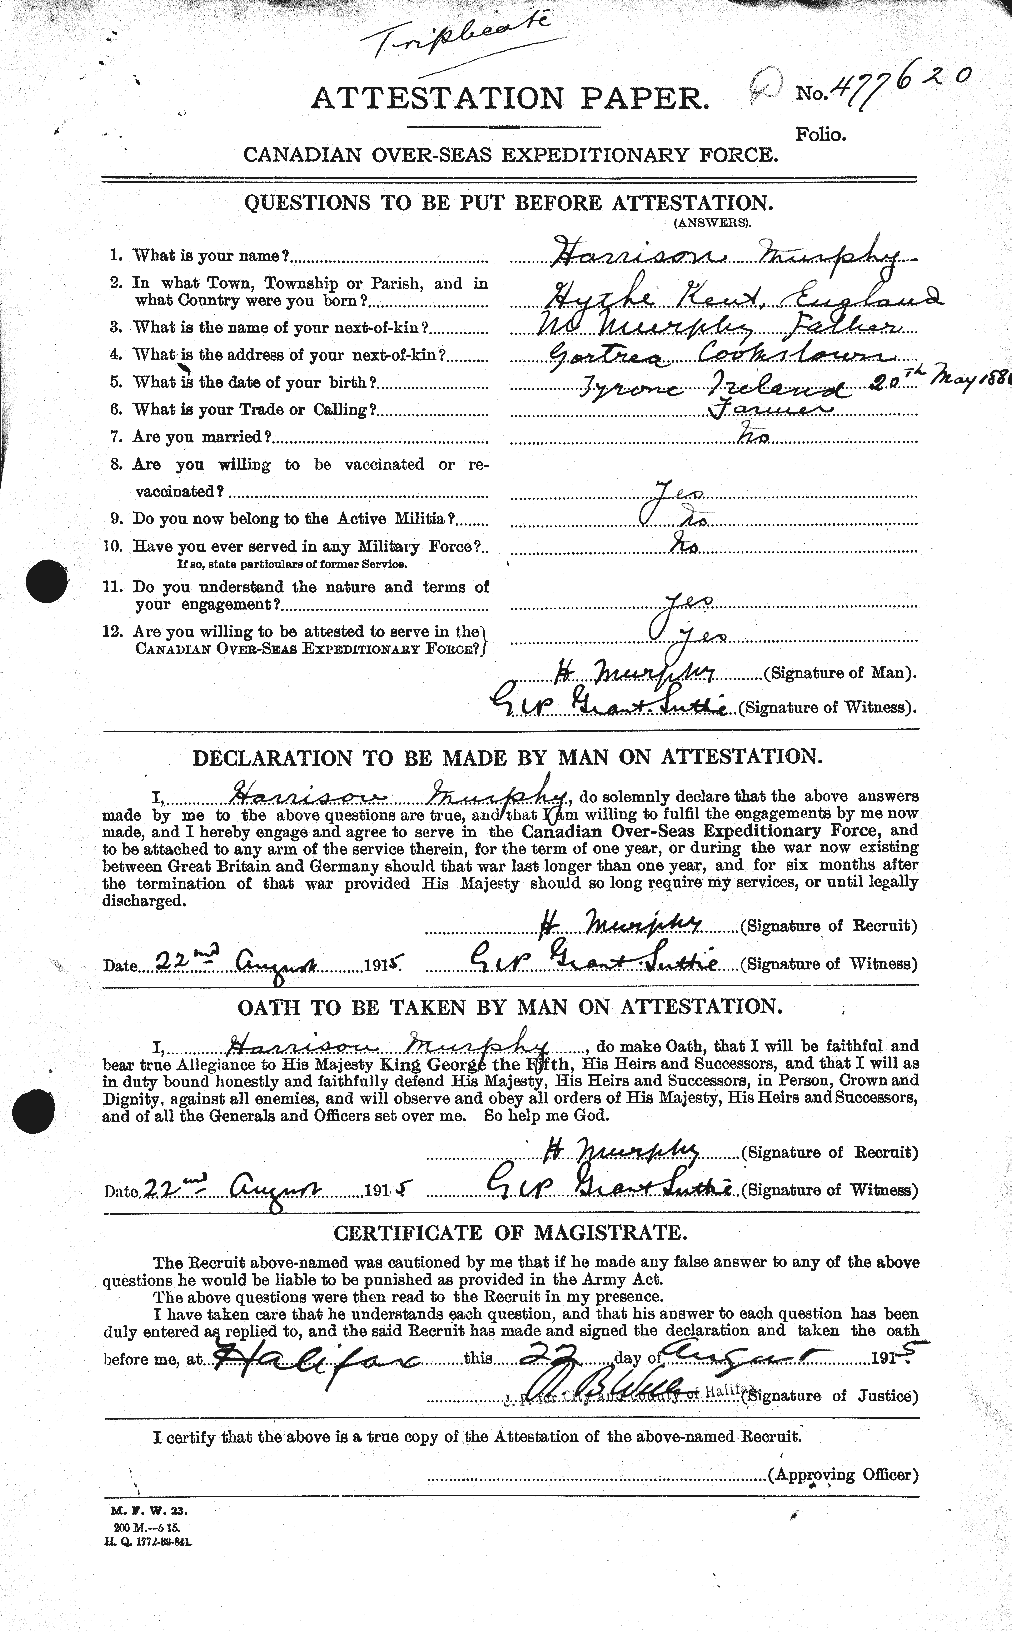 Personnel Records of the First World War - CEF 514529a